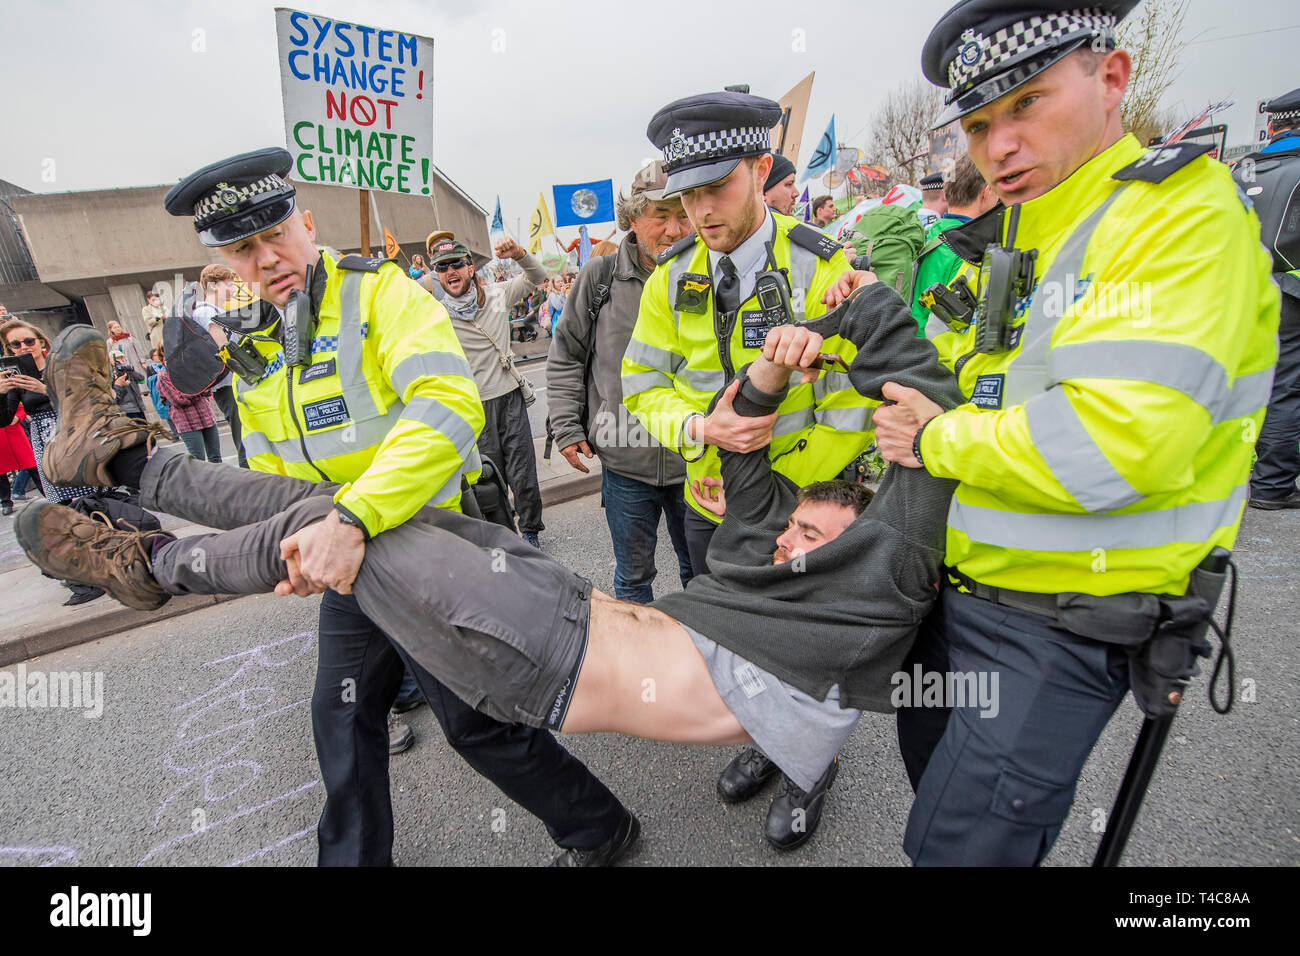 London, UK. 16th Apr, 2019. Police warn people blocking Waterloo Bridge under the public order act and then arrest them if they refuse to move to Marble Arch. It is mostly good humoured but some are dragged away to cheers from the remainder -  Day 2 - Protestors from Extinction Rebellion block several (Hyde Park, Oxford Cuircus, Warterloo Bridge and Parliament Square) junctions in London as part of their ongoing protest to demand action by the UK Government on the 'climate chrisis'. The action is part of an international co-ordinated protest. Credit: Guy Bell/Alamy Live News Stock Photo